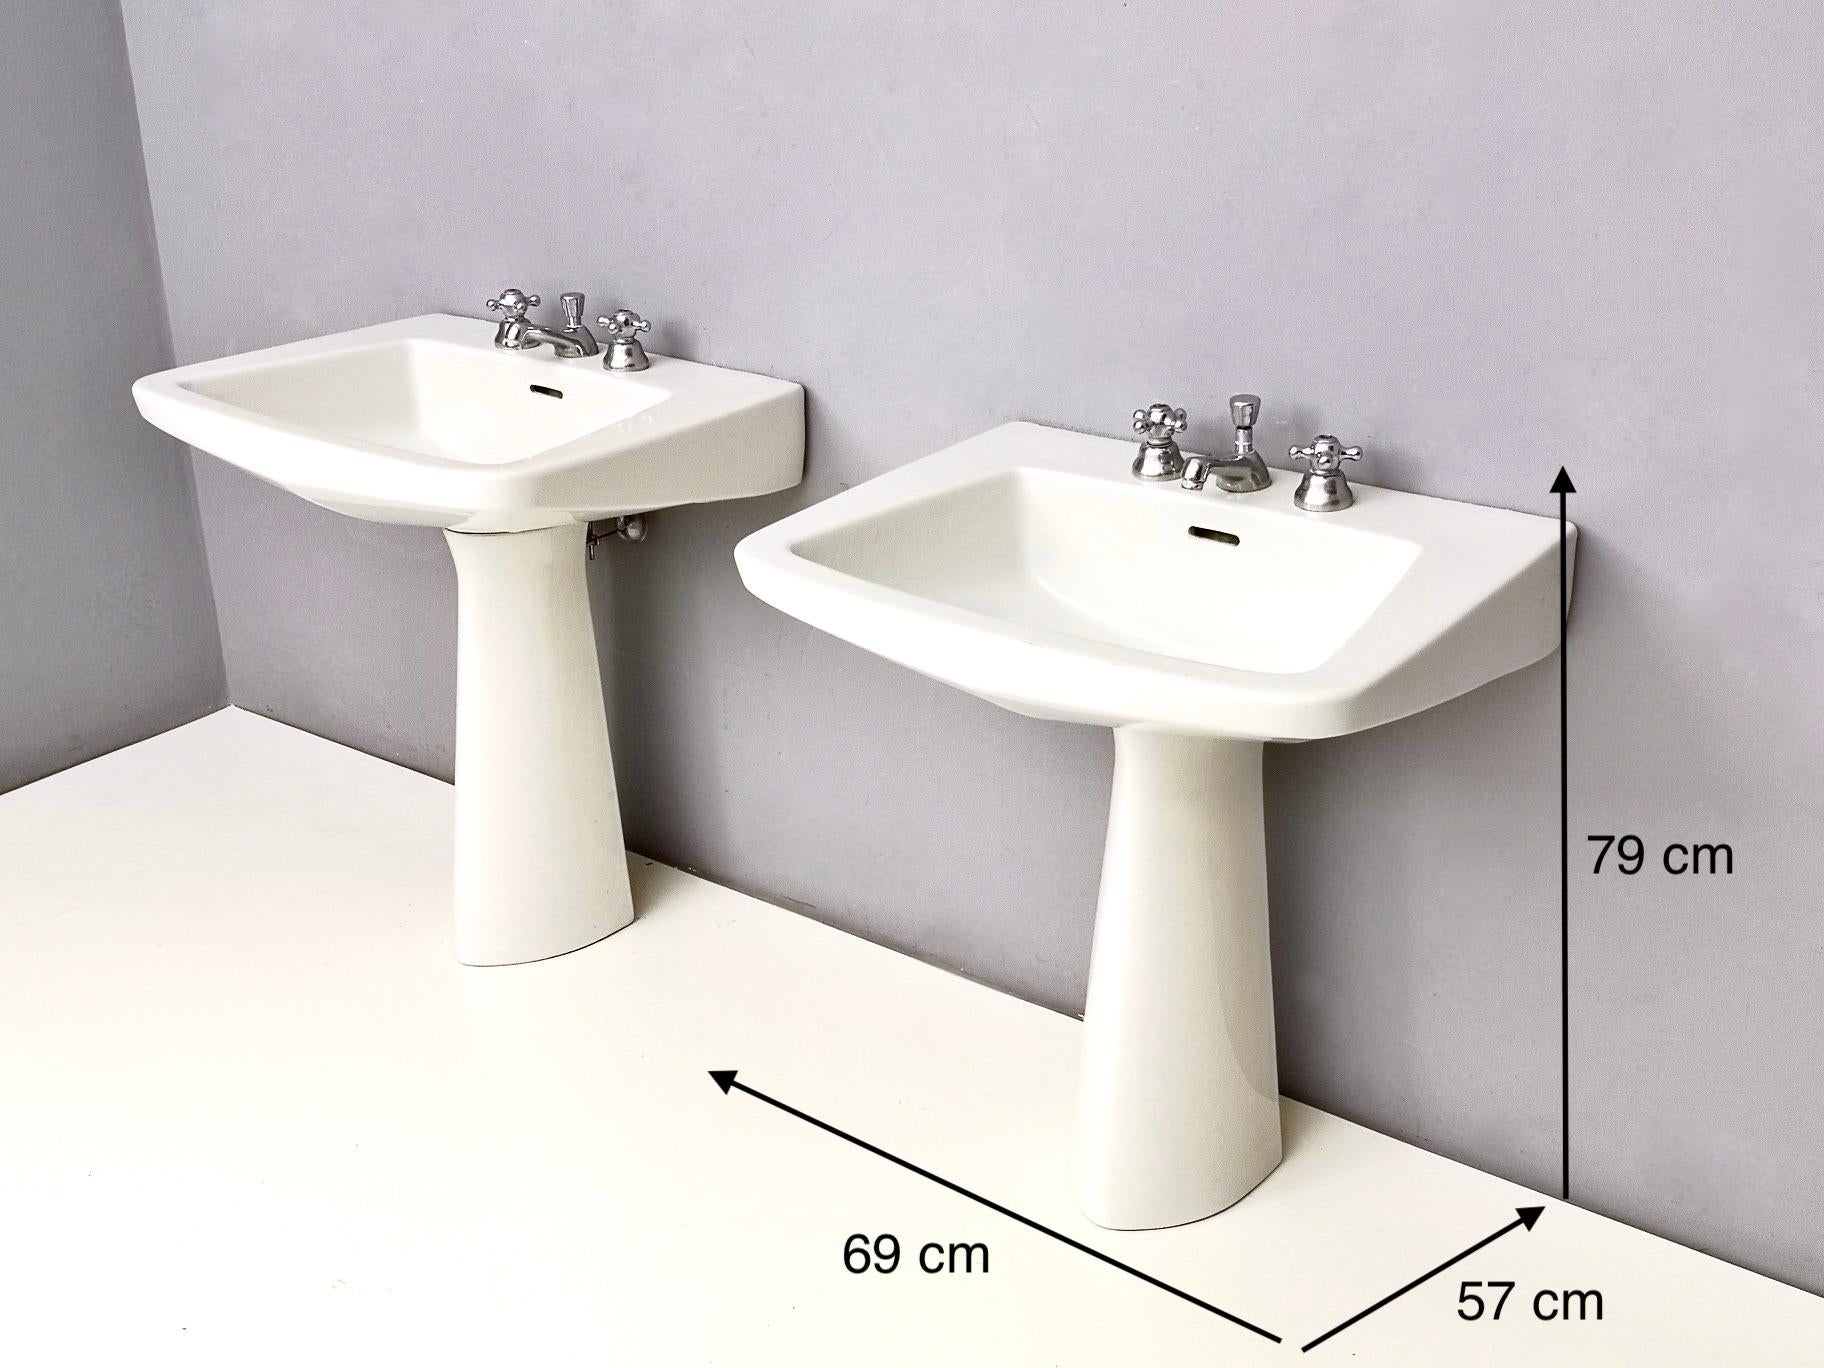 Pair of Sinks by Gio Ponti with G. Labalme, G. Pozzi and A. Rosselli, Italy 5